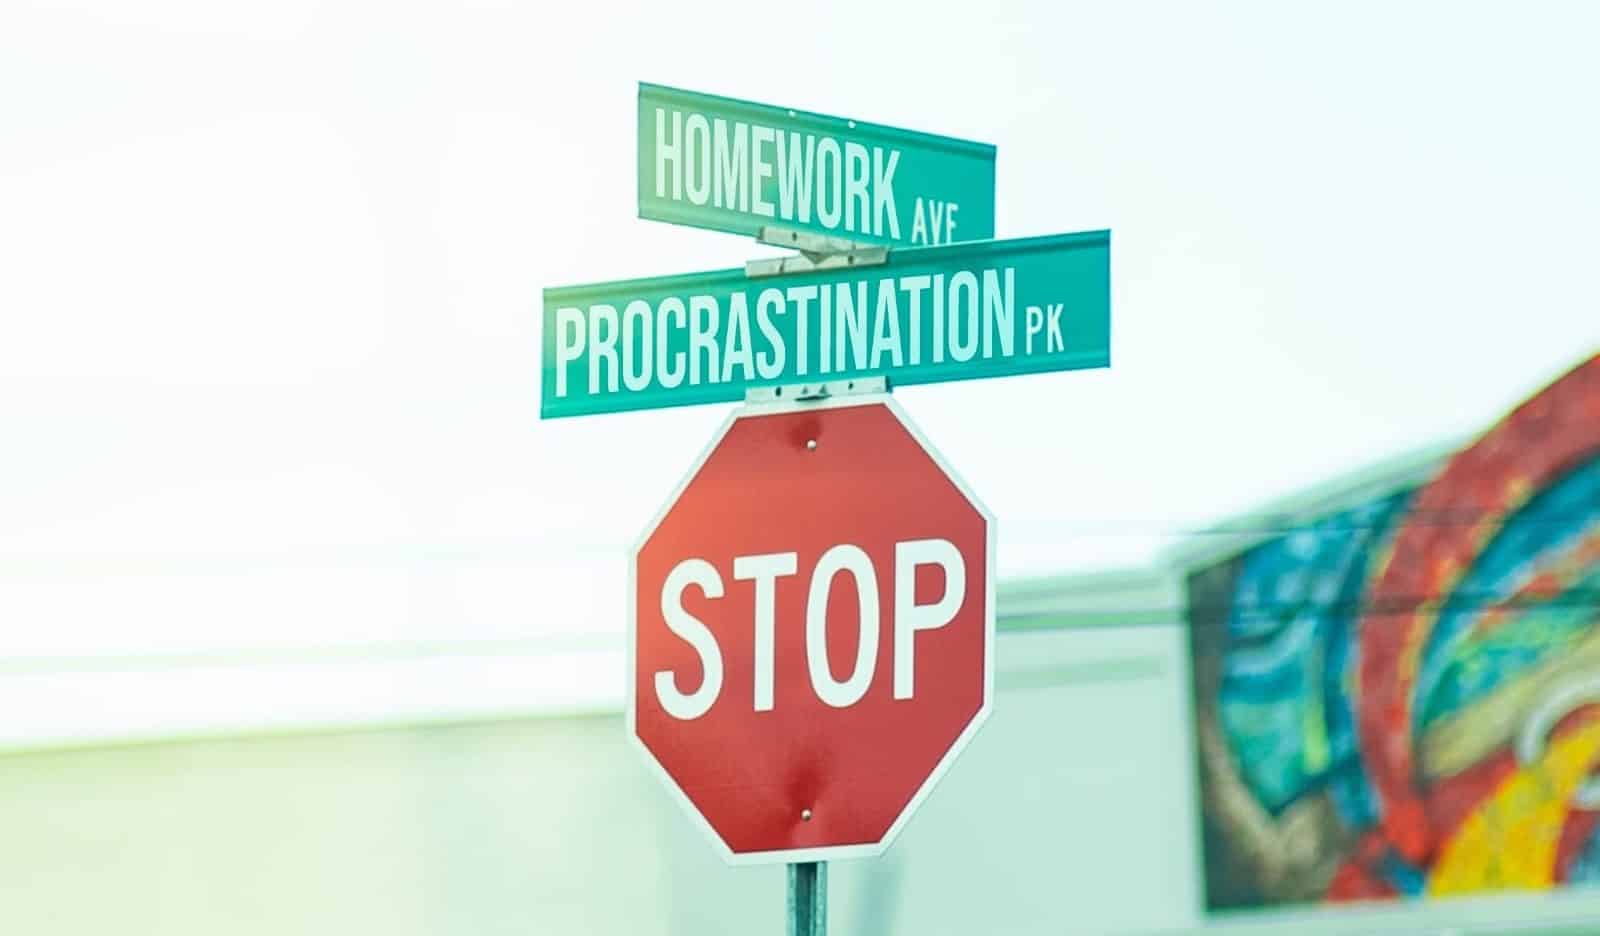 How to overcome Procrastination when working from home